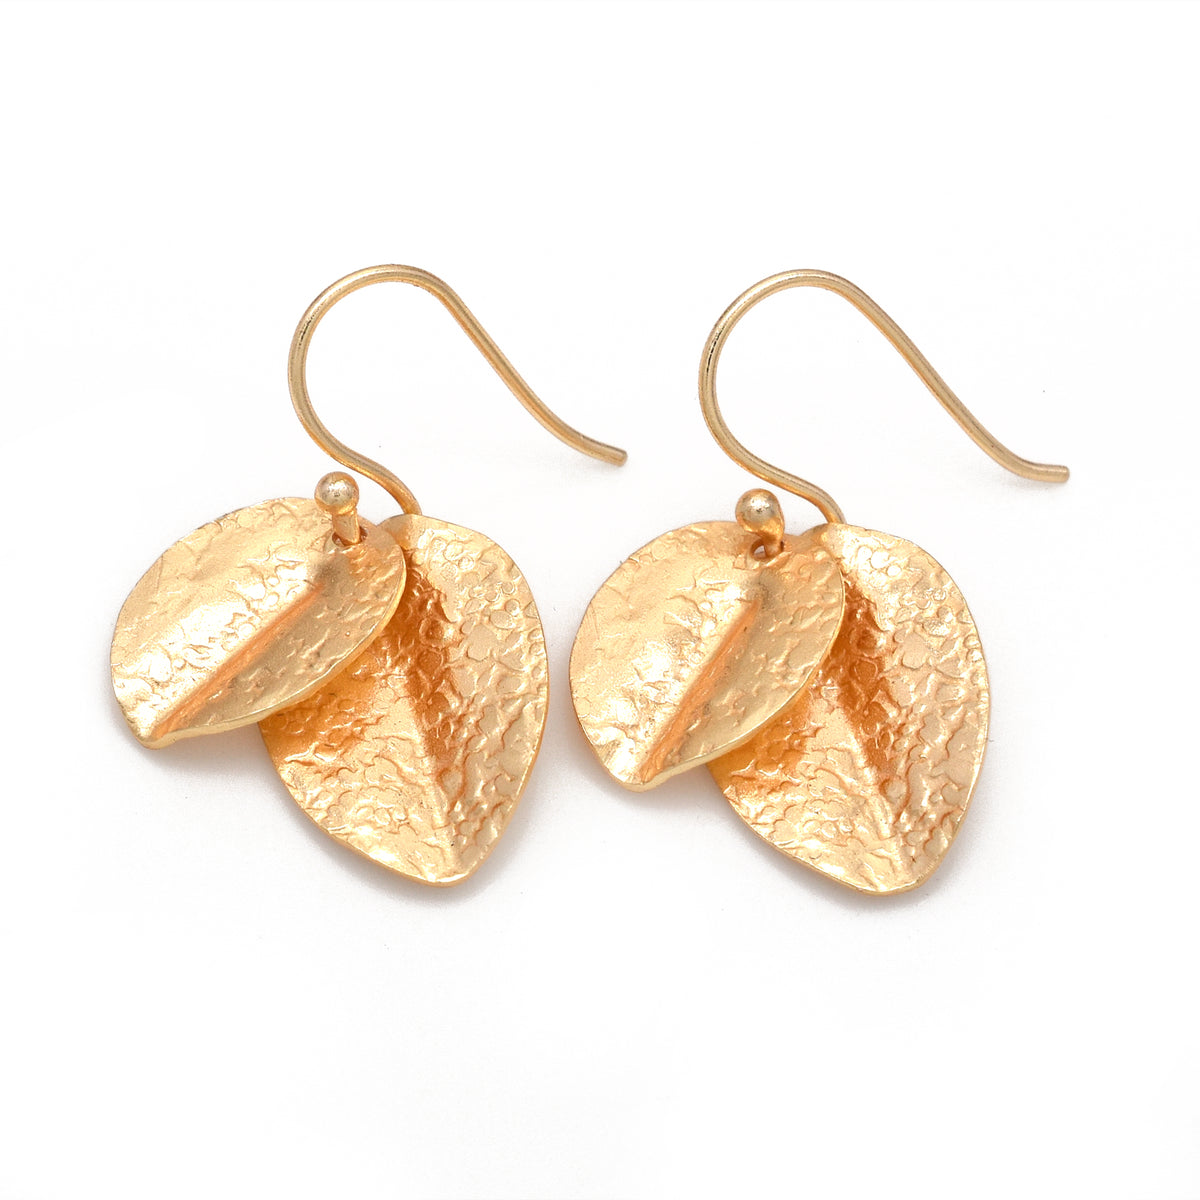 Gemma Earring - Double Leaf - Gold Plated